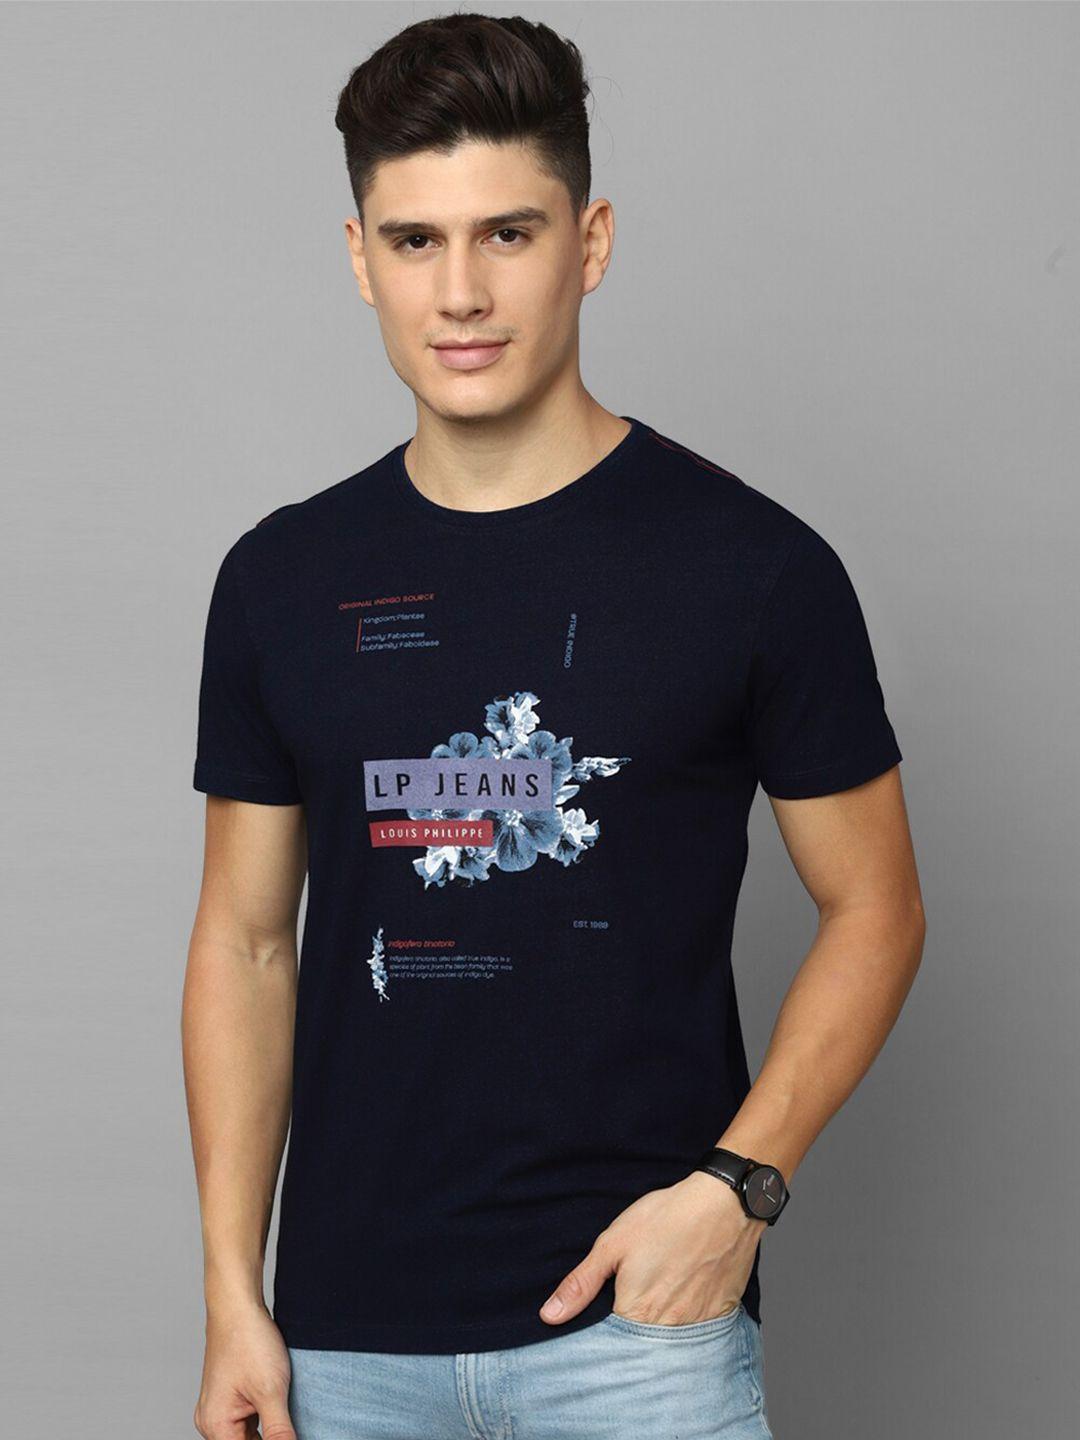 louis philippe jeans typography printed slim fit pure cotton t-shirt